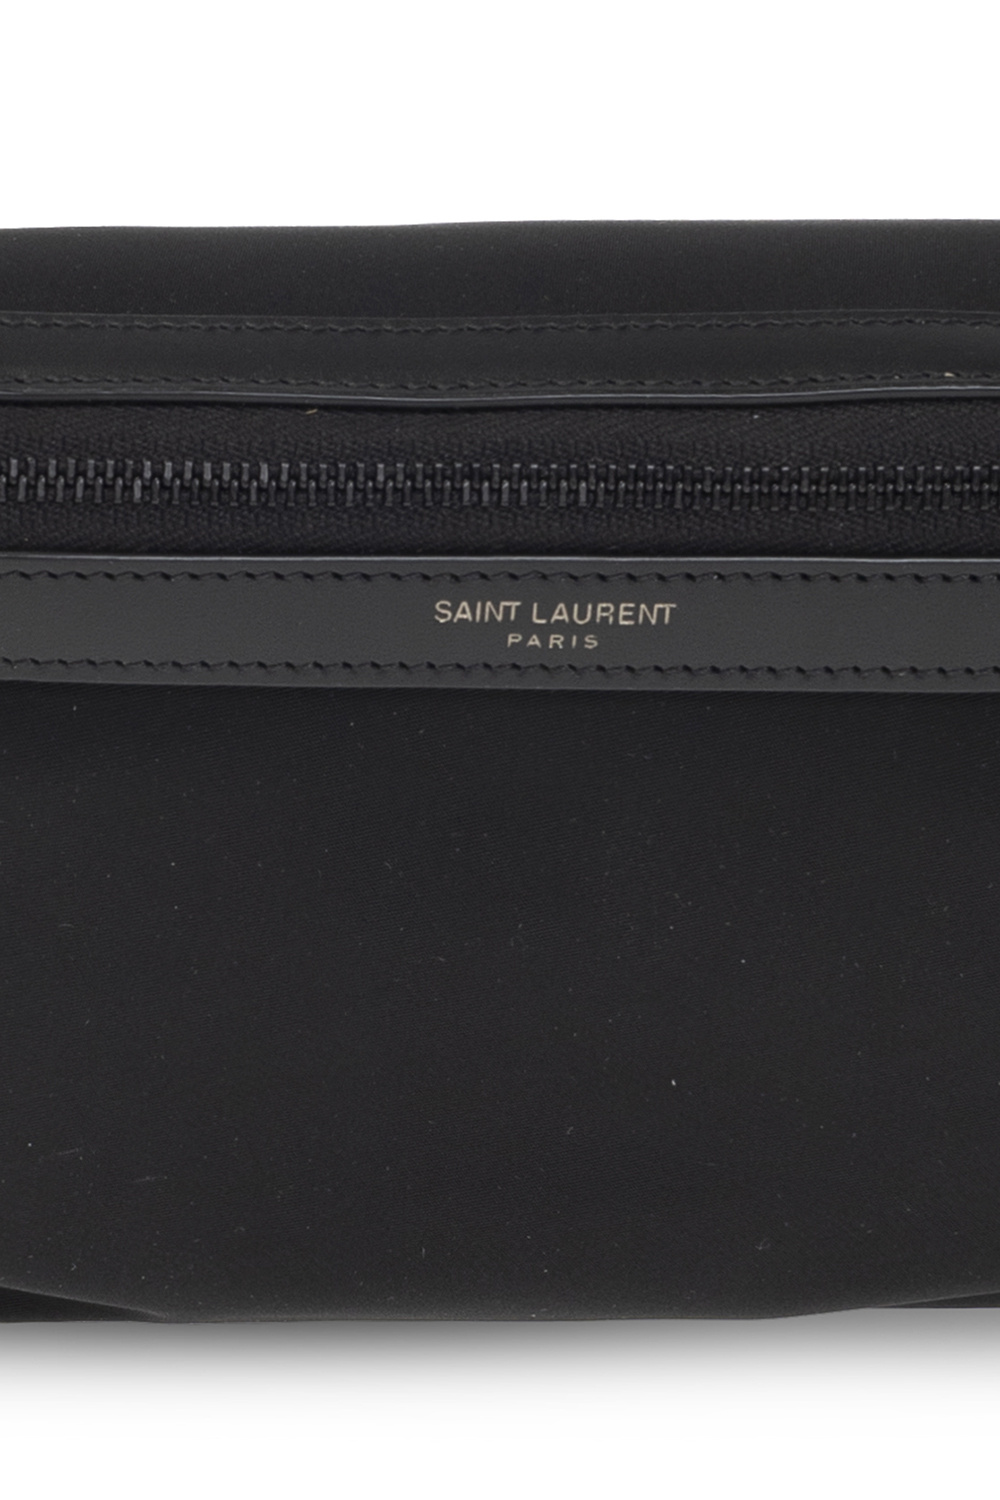 Saint Laurent Saint Laurent Yves Saint Laurent Other Collection